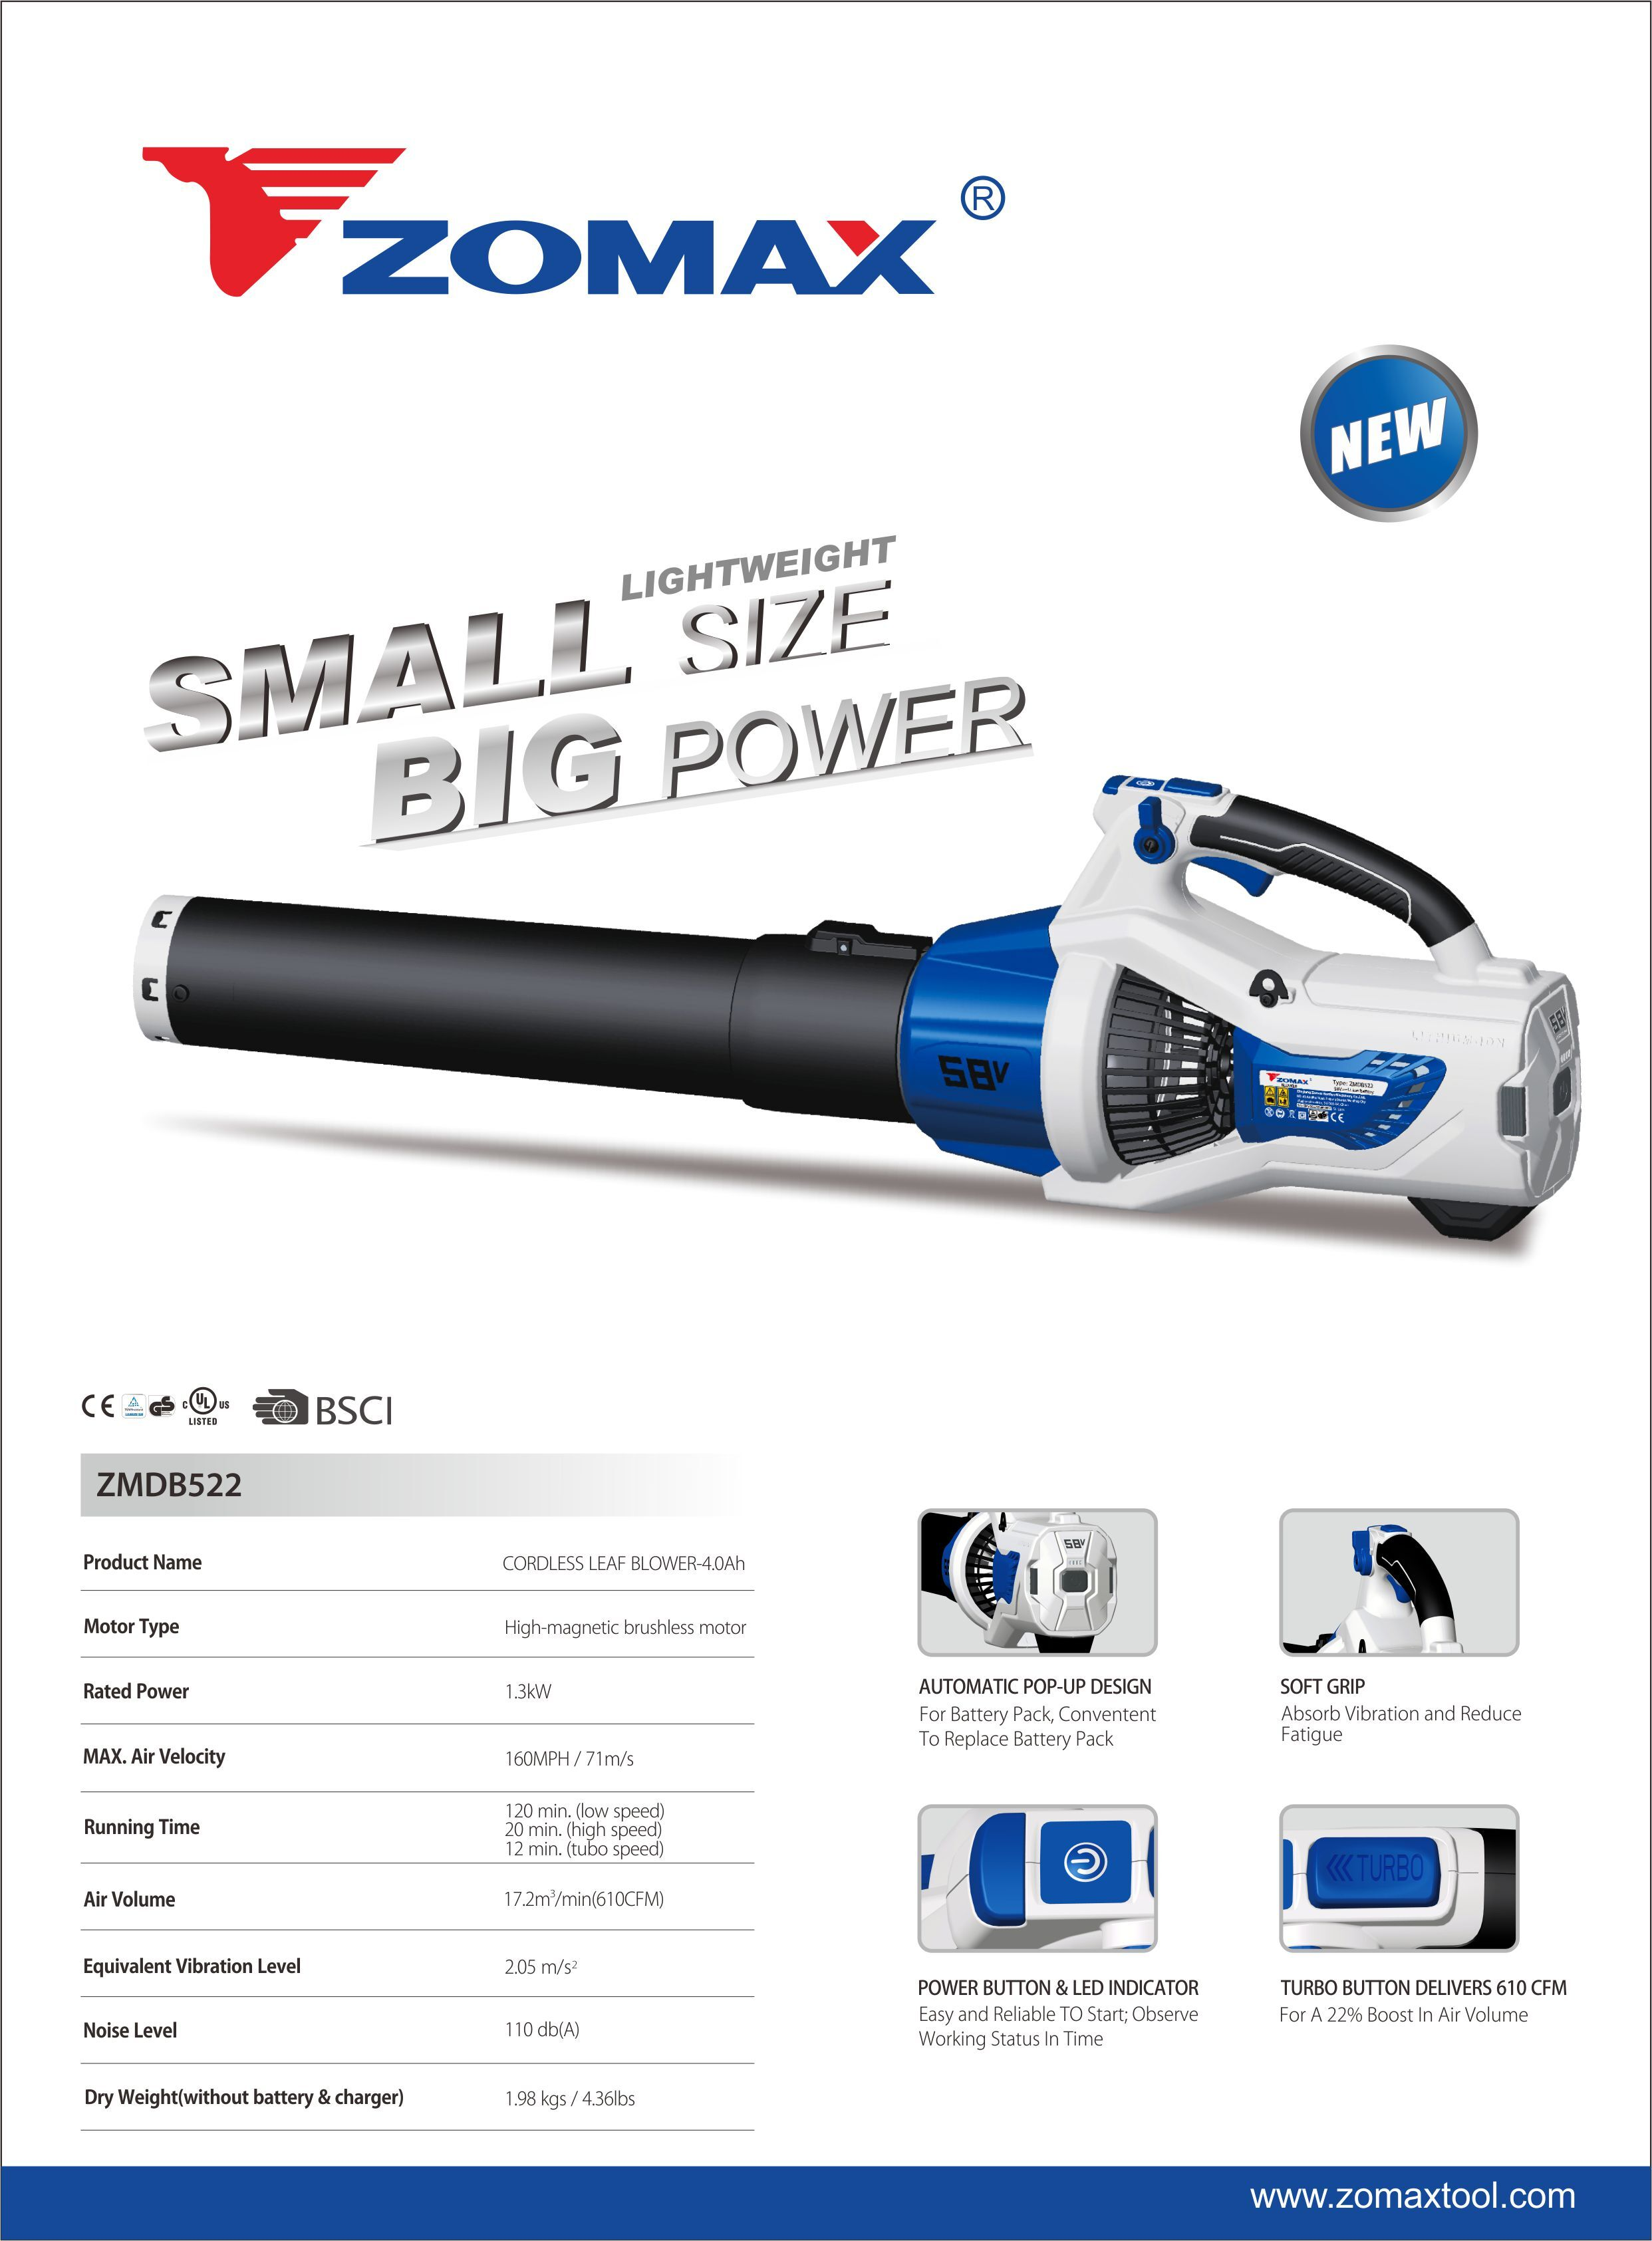 Cordless Blower Leaf blower strong snow blower longlast battery and lightweight within 2KG